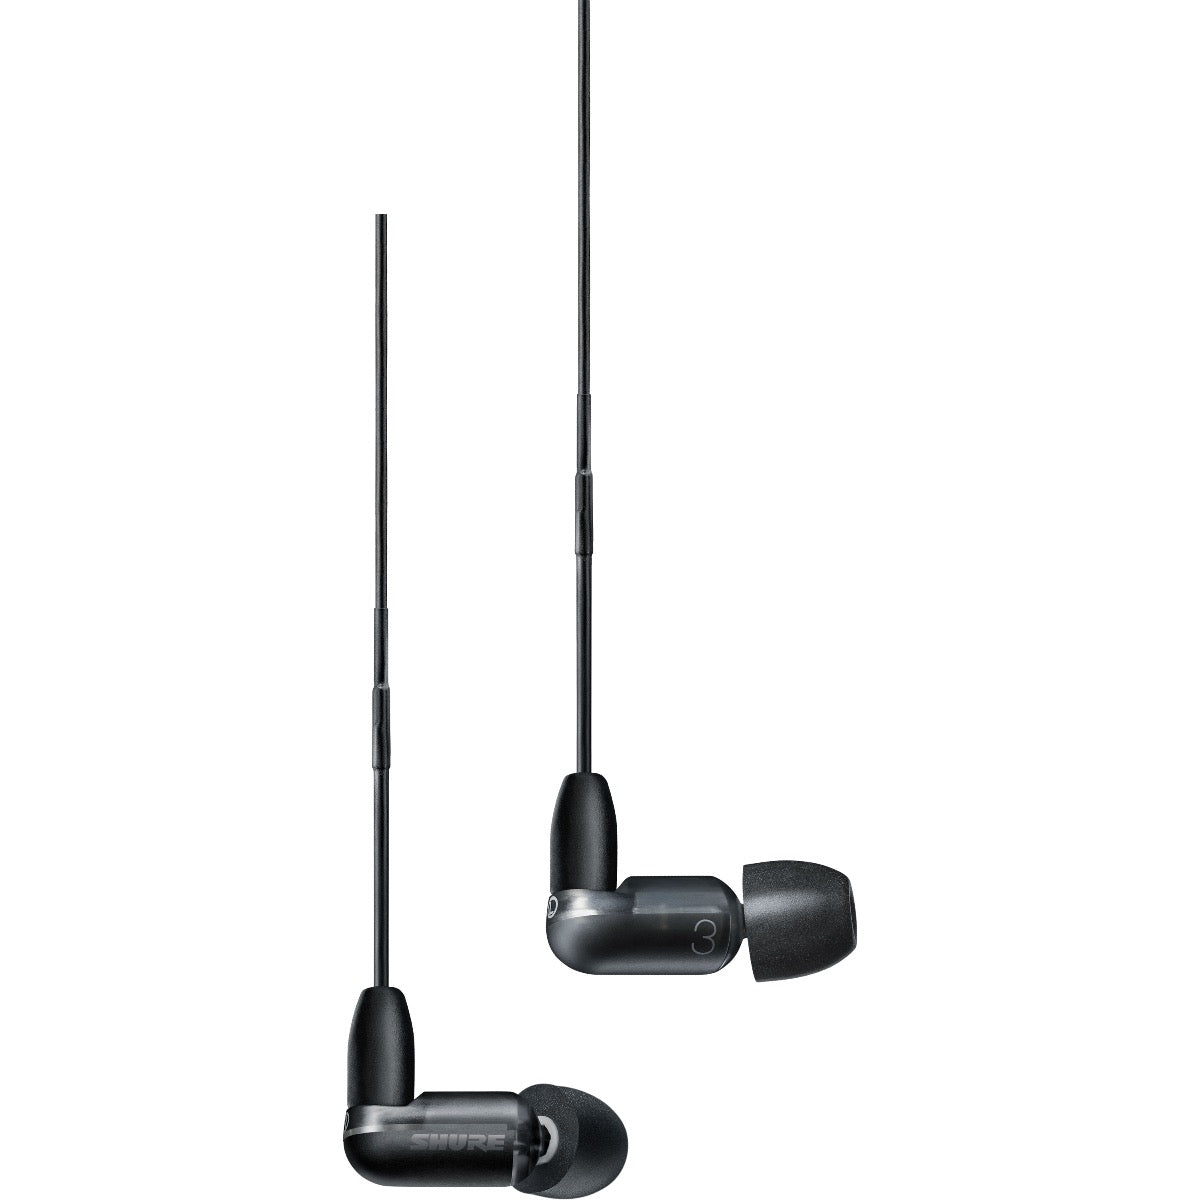 Close up view of Shure AONIC 3 Sound Isolating Earphones - Black earpieces showing both sides